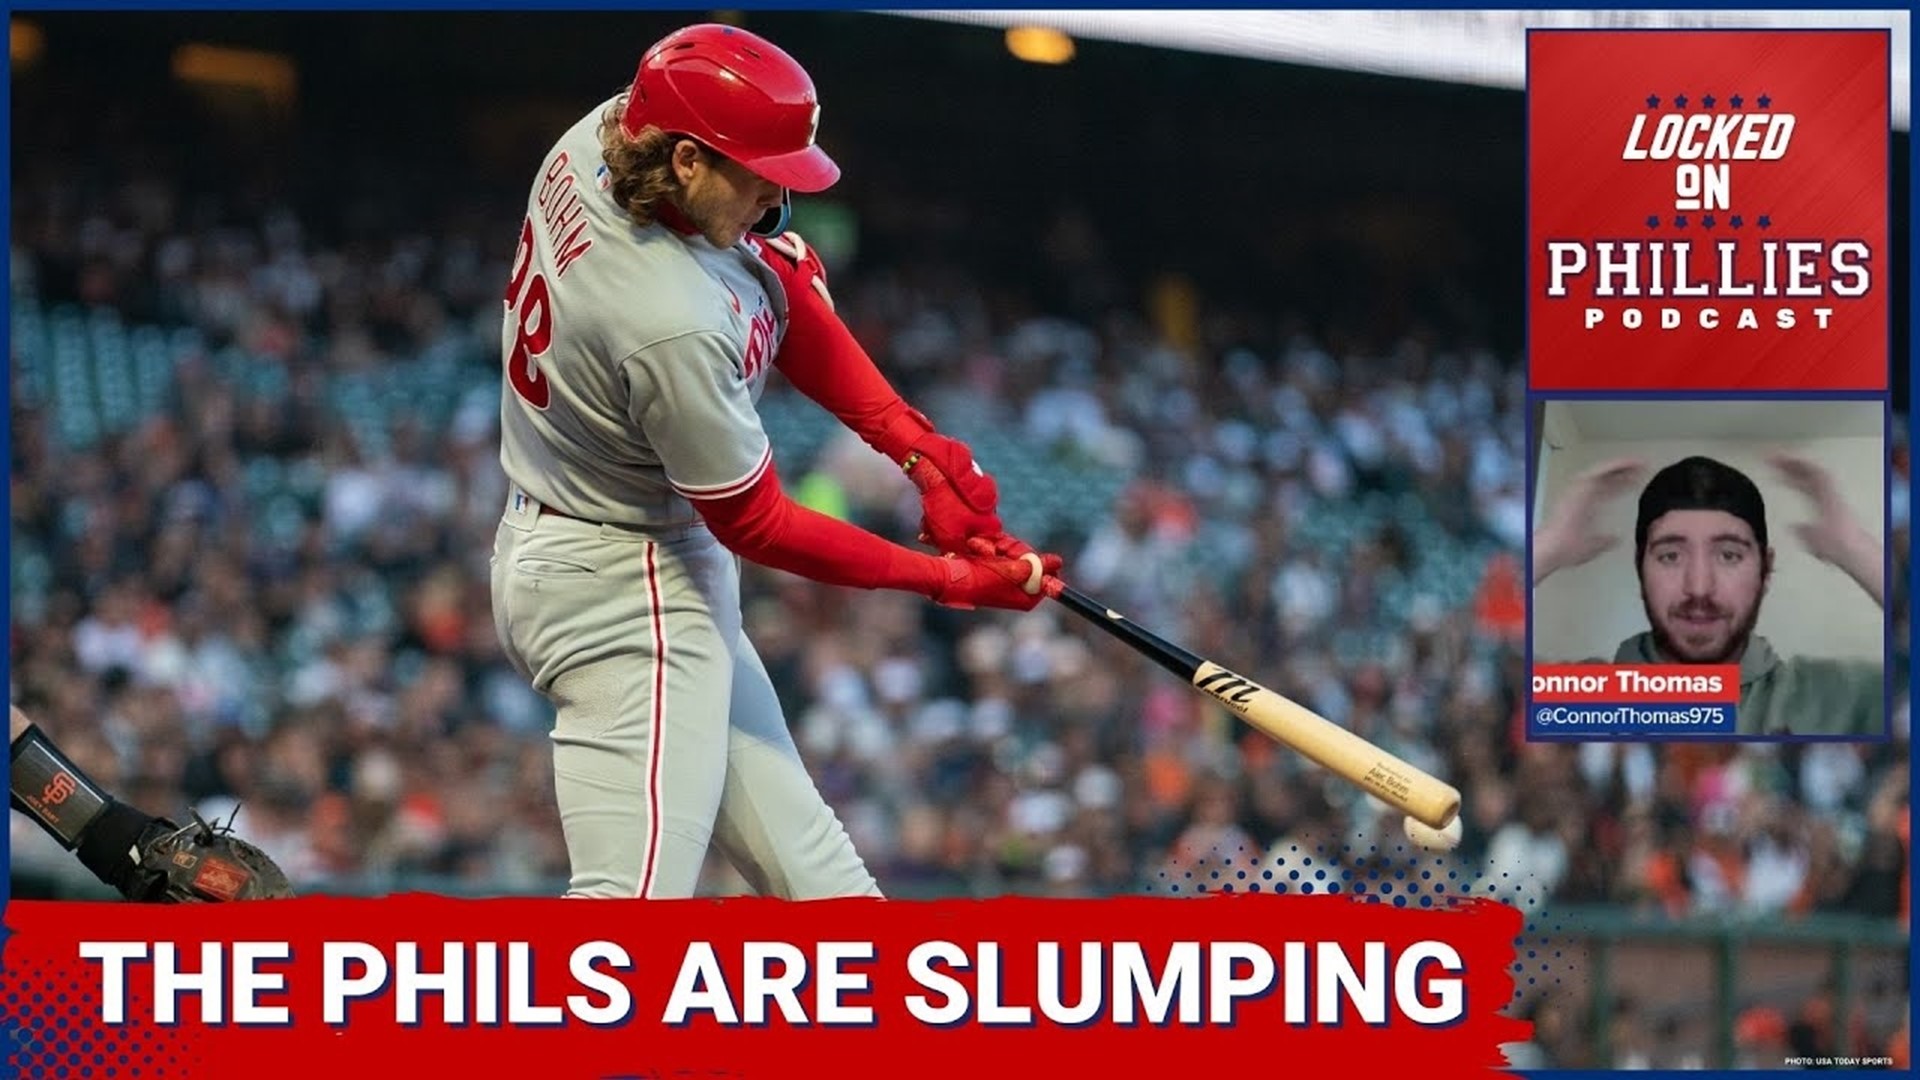 In today's episode, Connor discusses the Philadelphia Phillies' 4-3 loss to the San Francisco Giants last night.